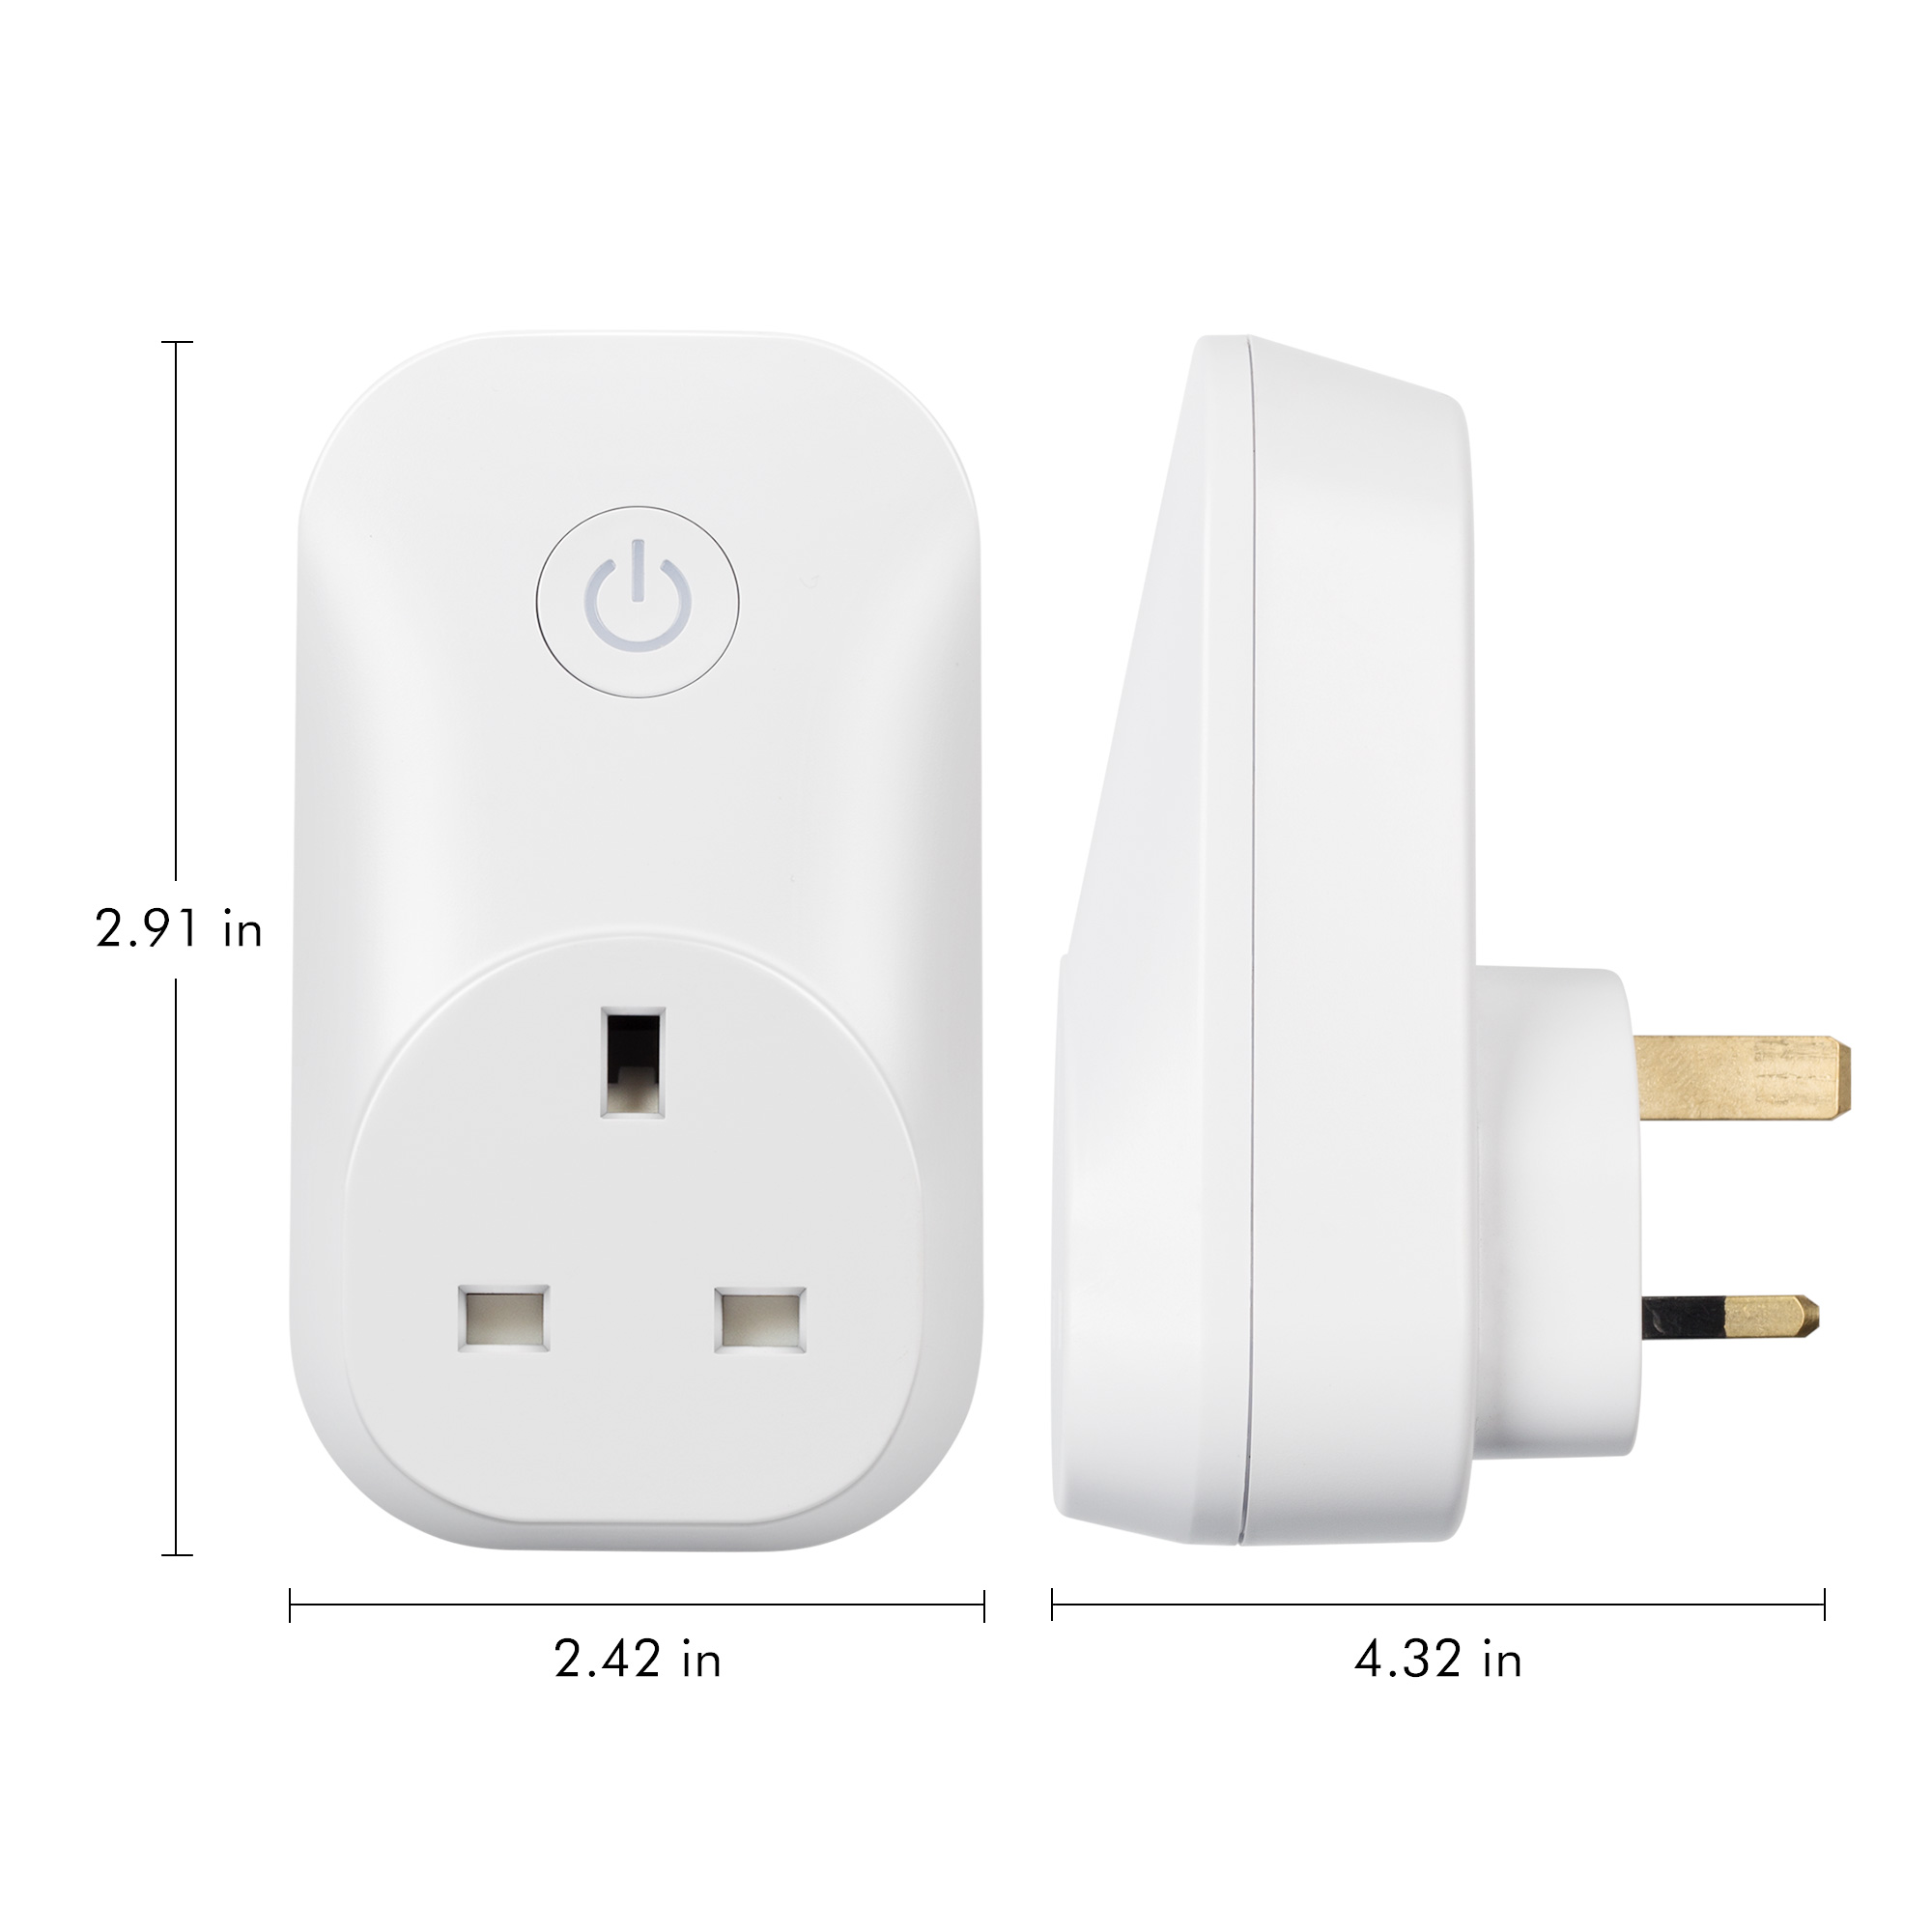 HBN - Outdoor Smart WiFi Plug Outlet, Wireless Remote Control by App.